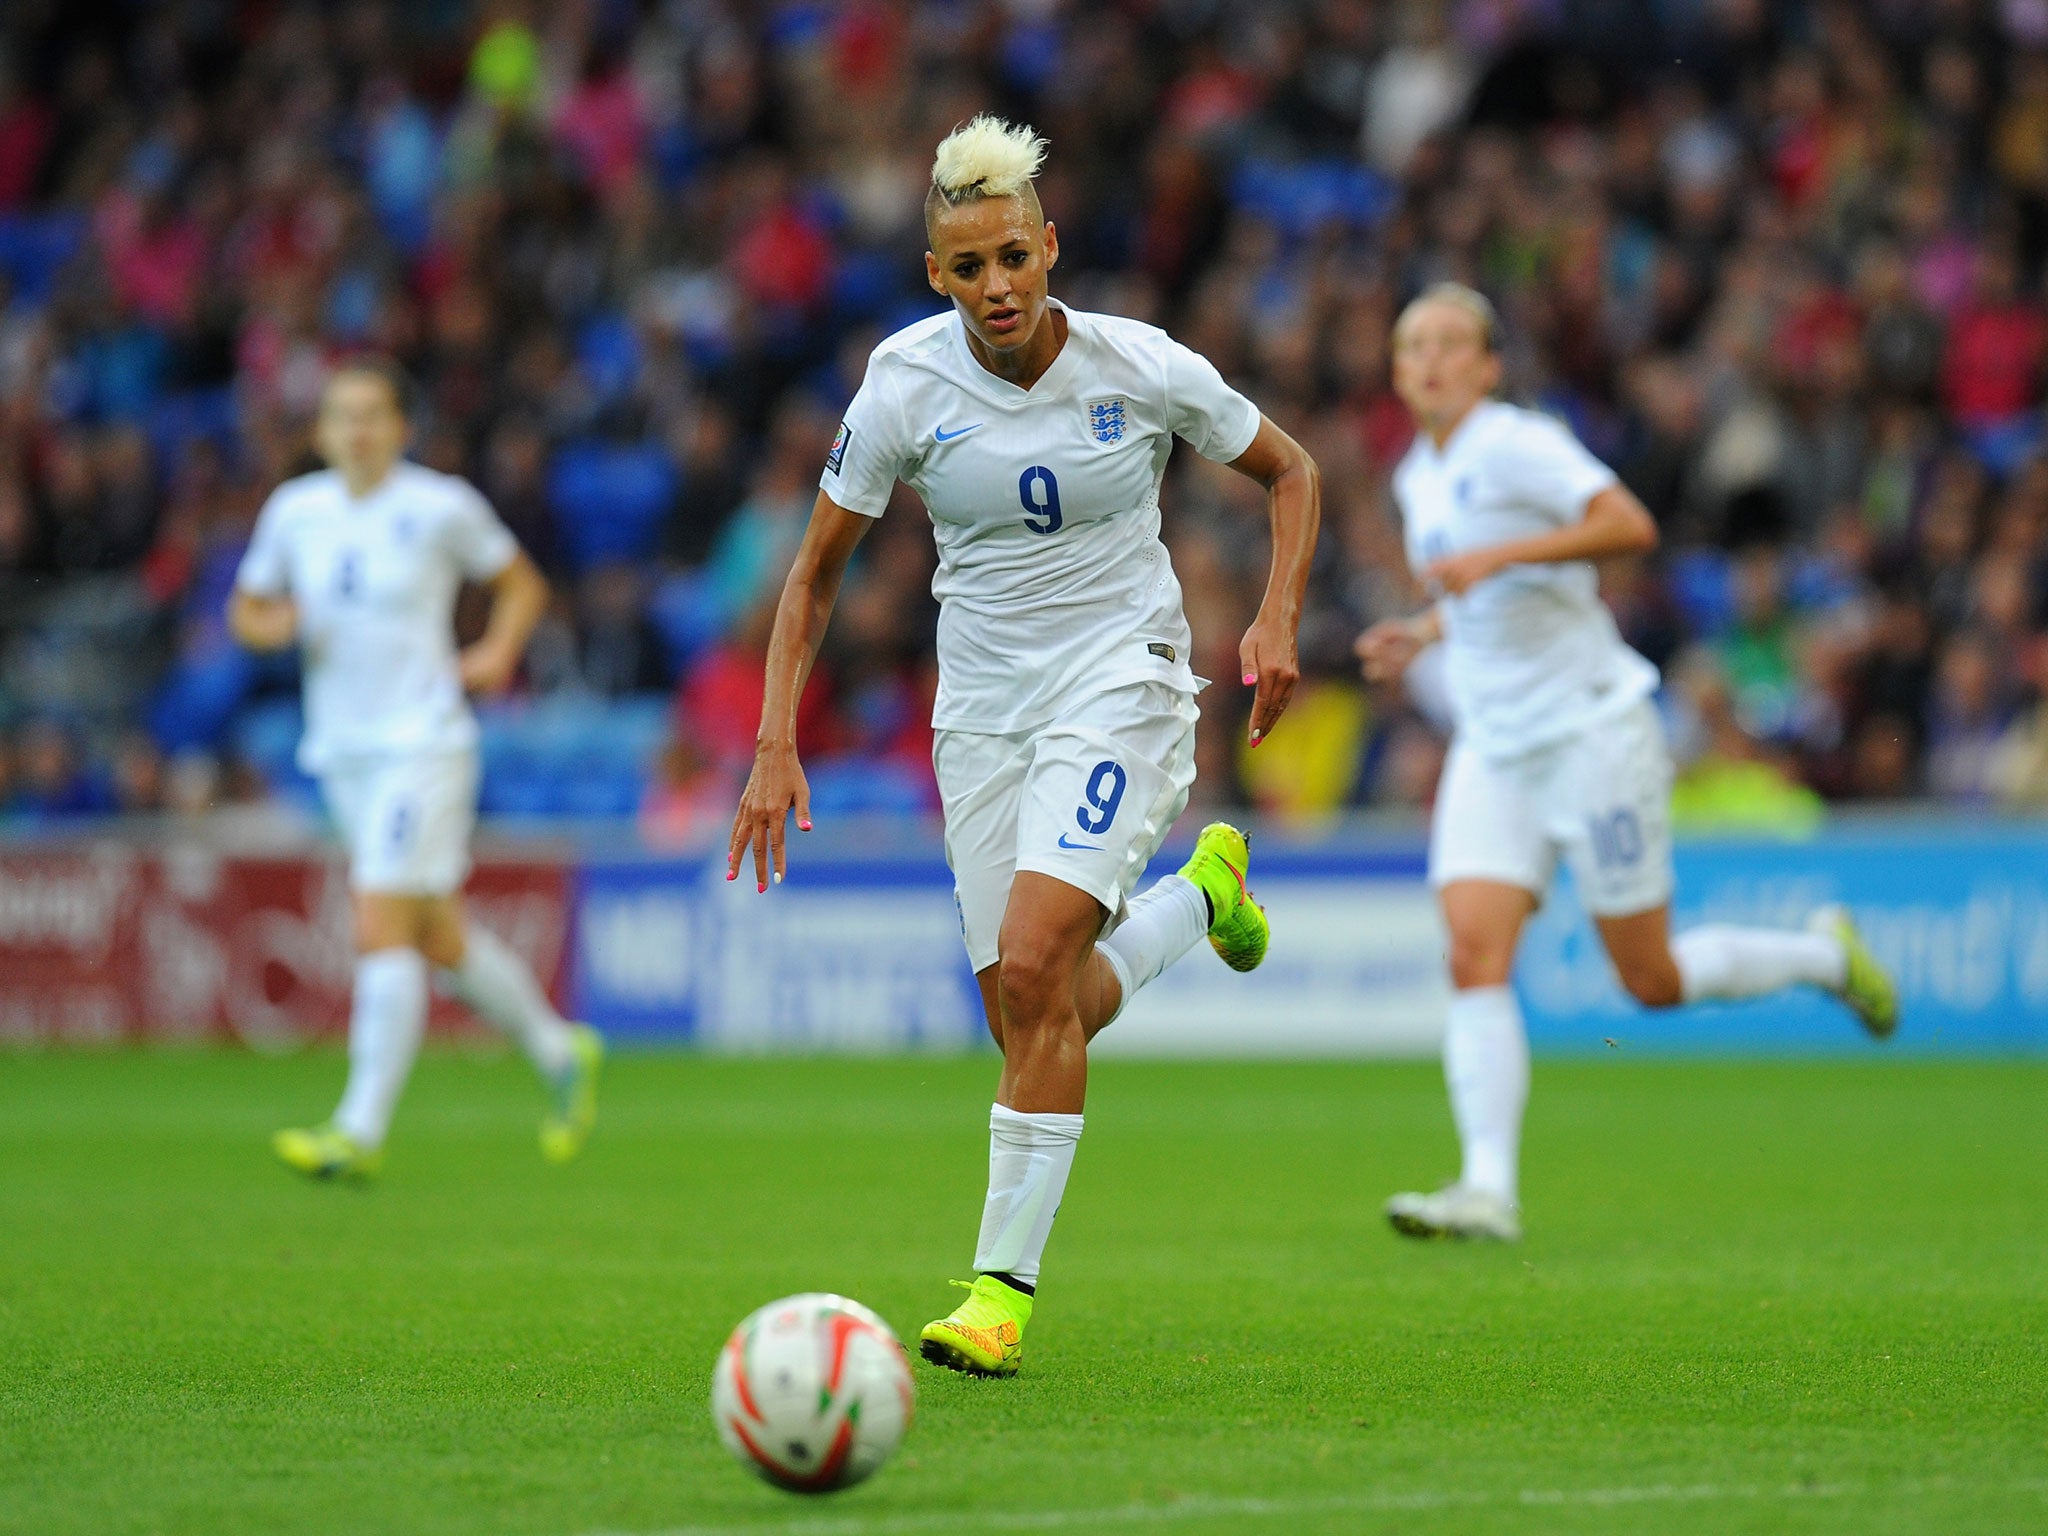 England forward Lianne Sanderson in action during the FIFA 2015 Women's World Cup Group 6 Qualifier between Wales and England at Cardiff City Stadium on August 21